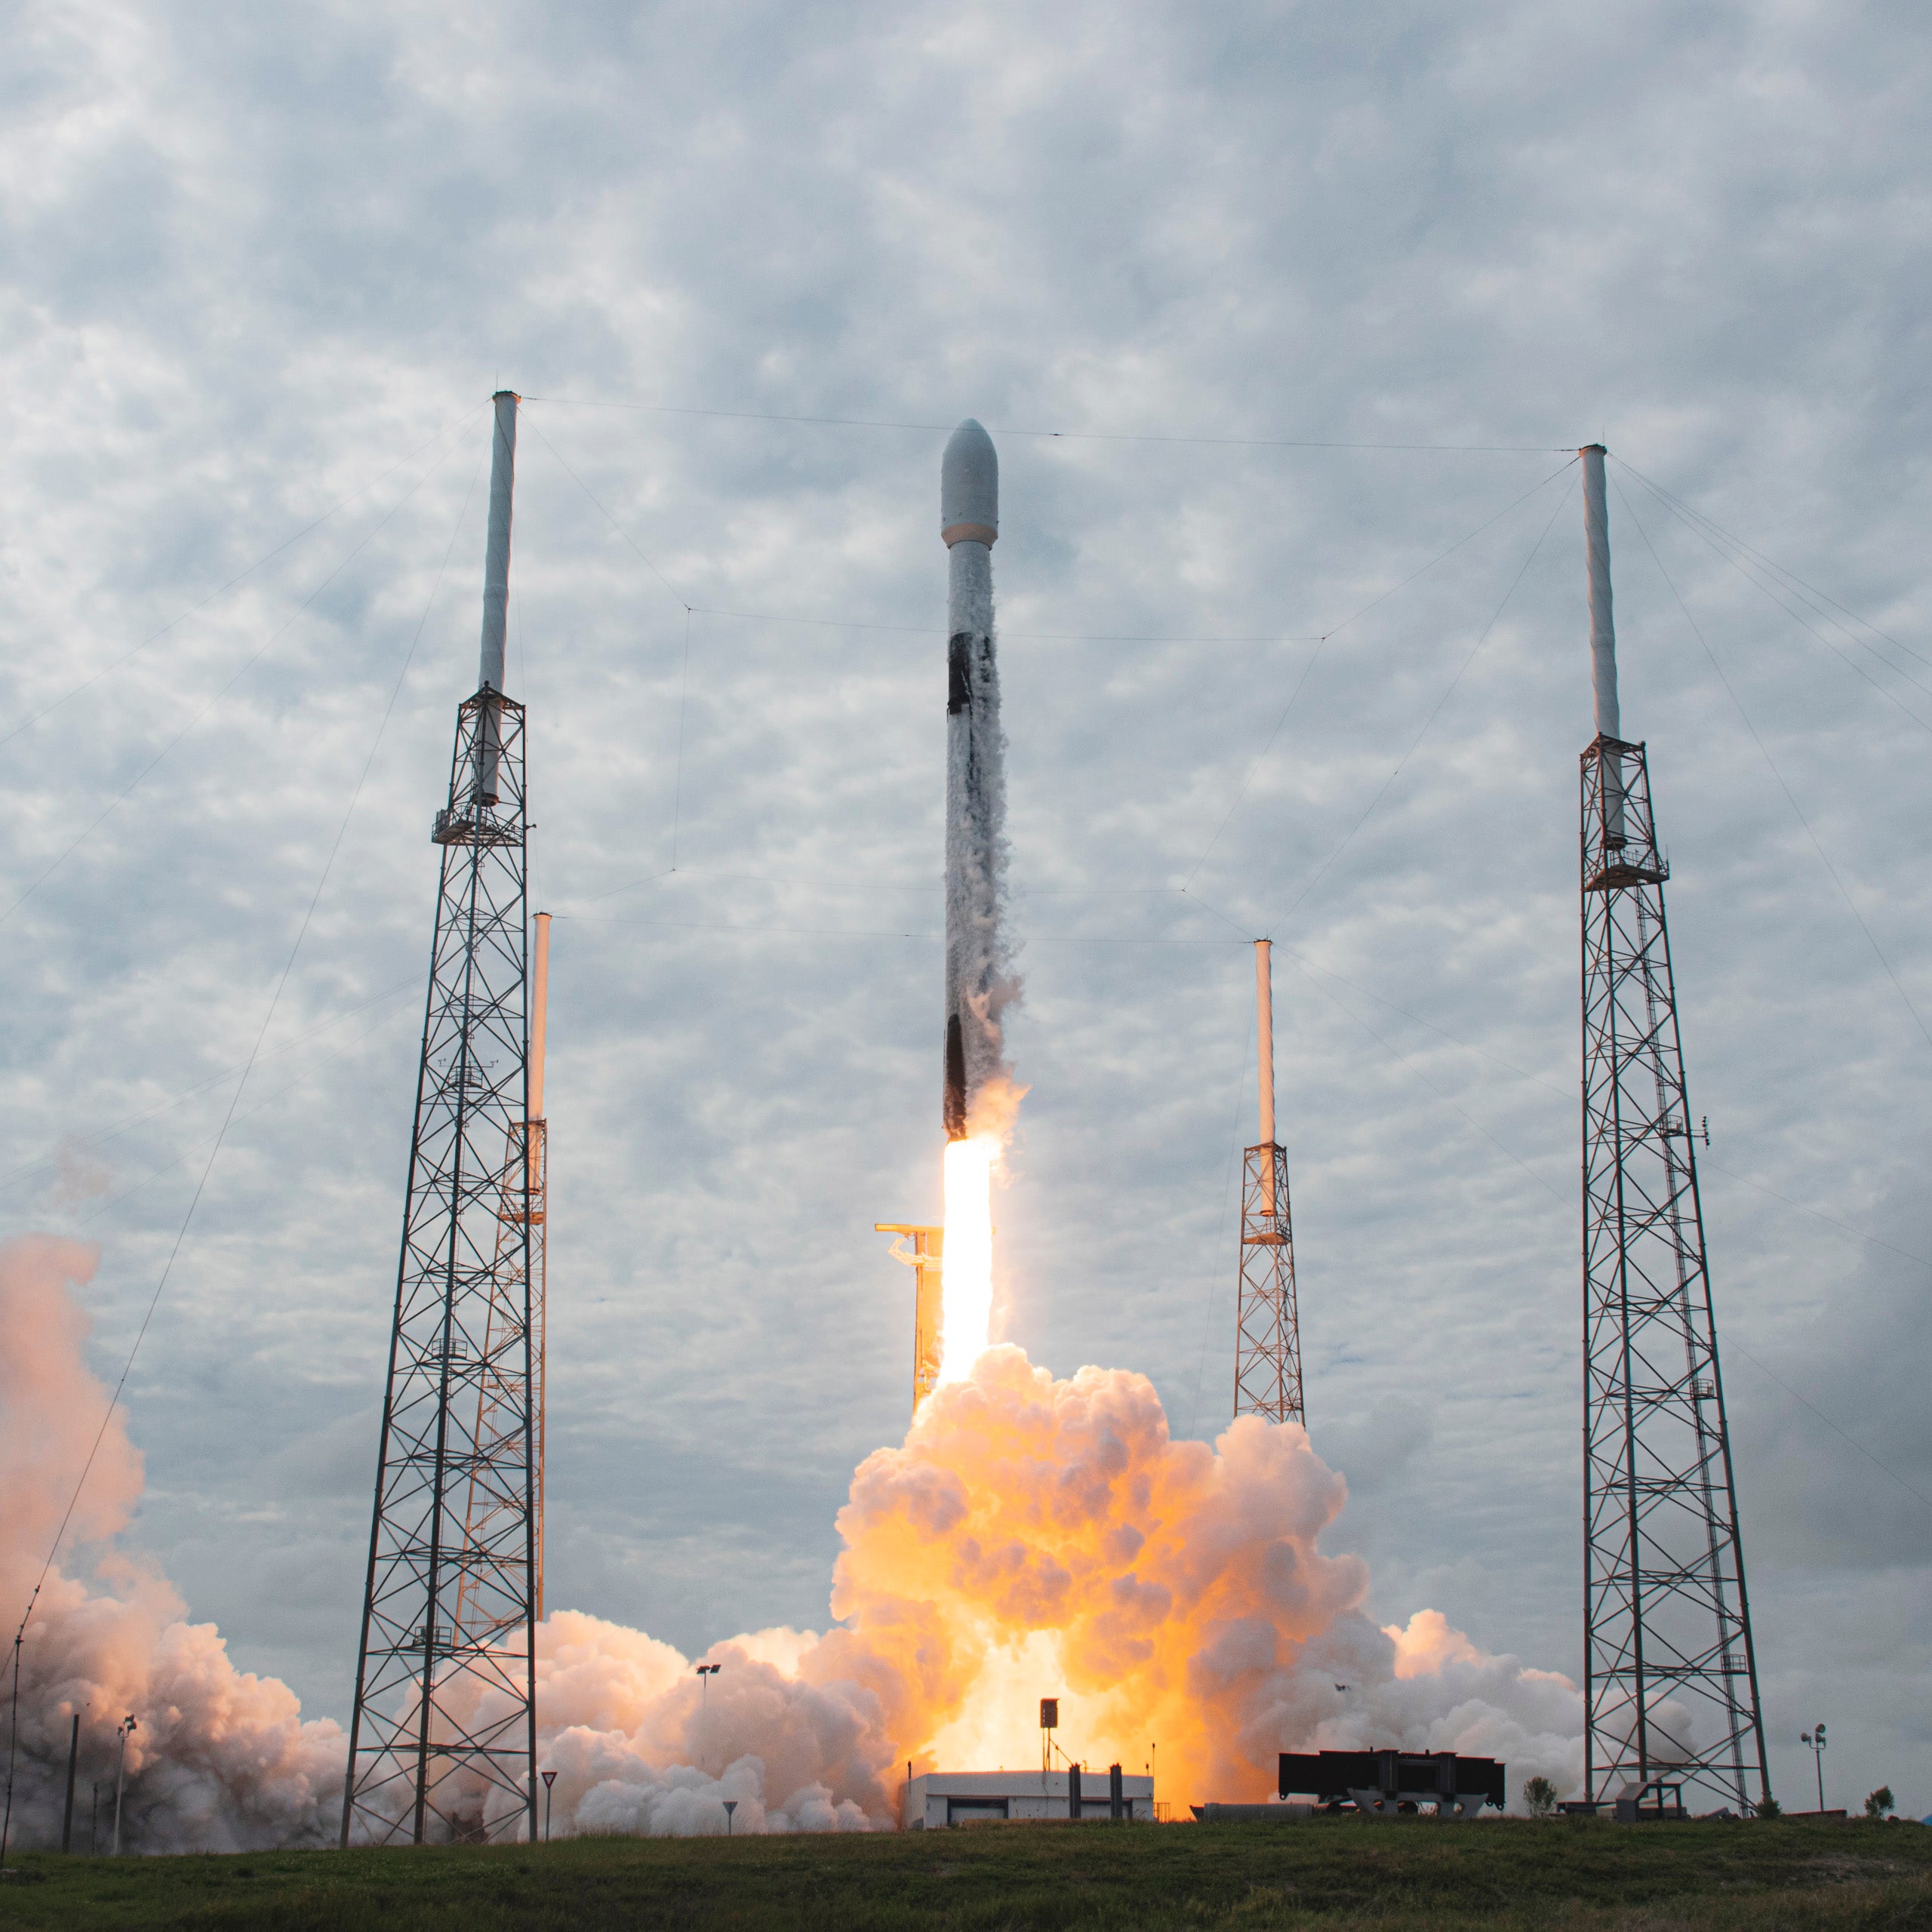 U.S. Space Force awards SpaceX $29 million to gain insight into rocket launches